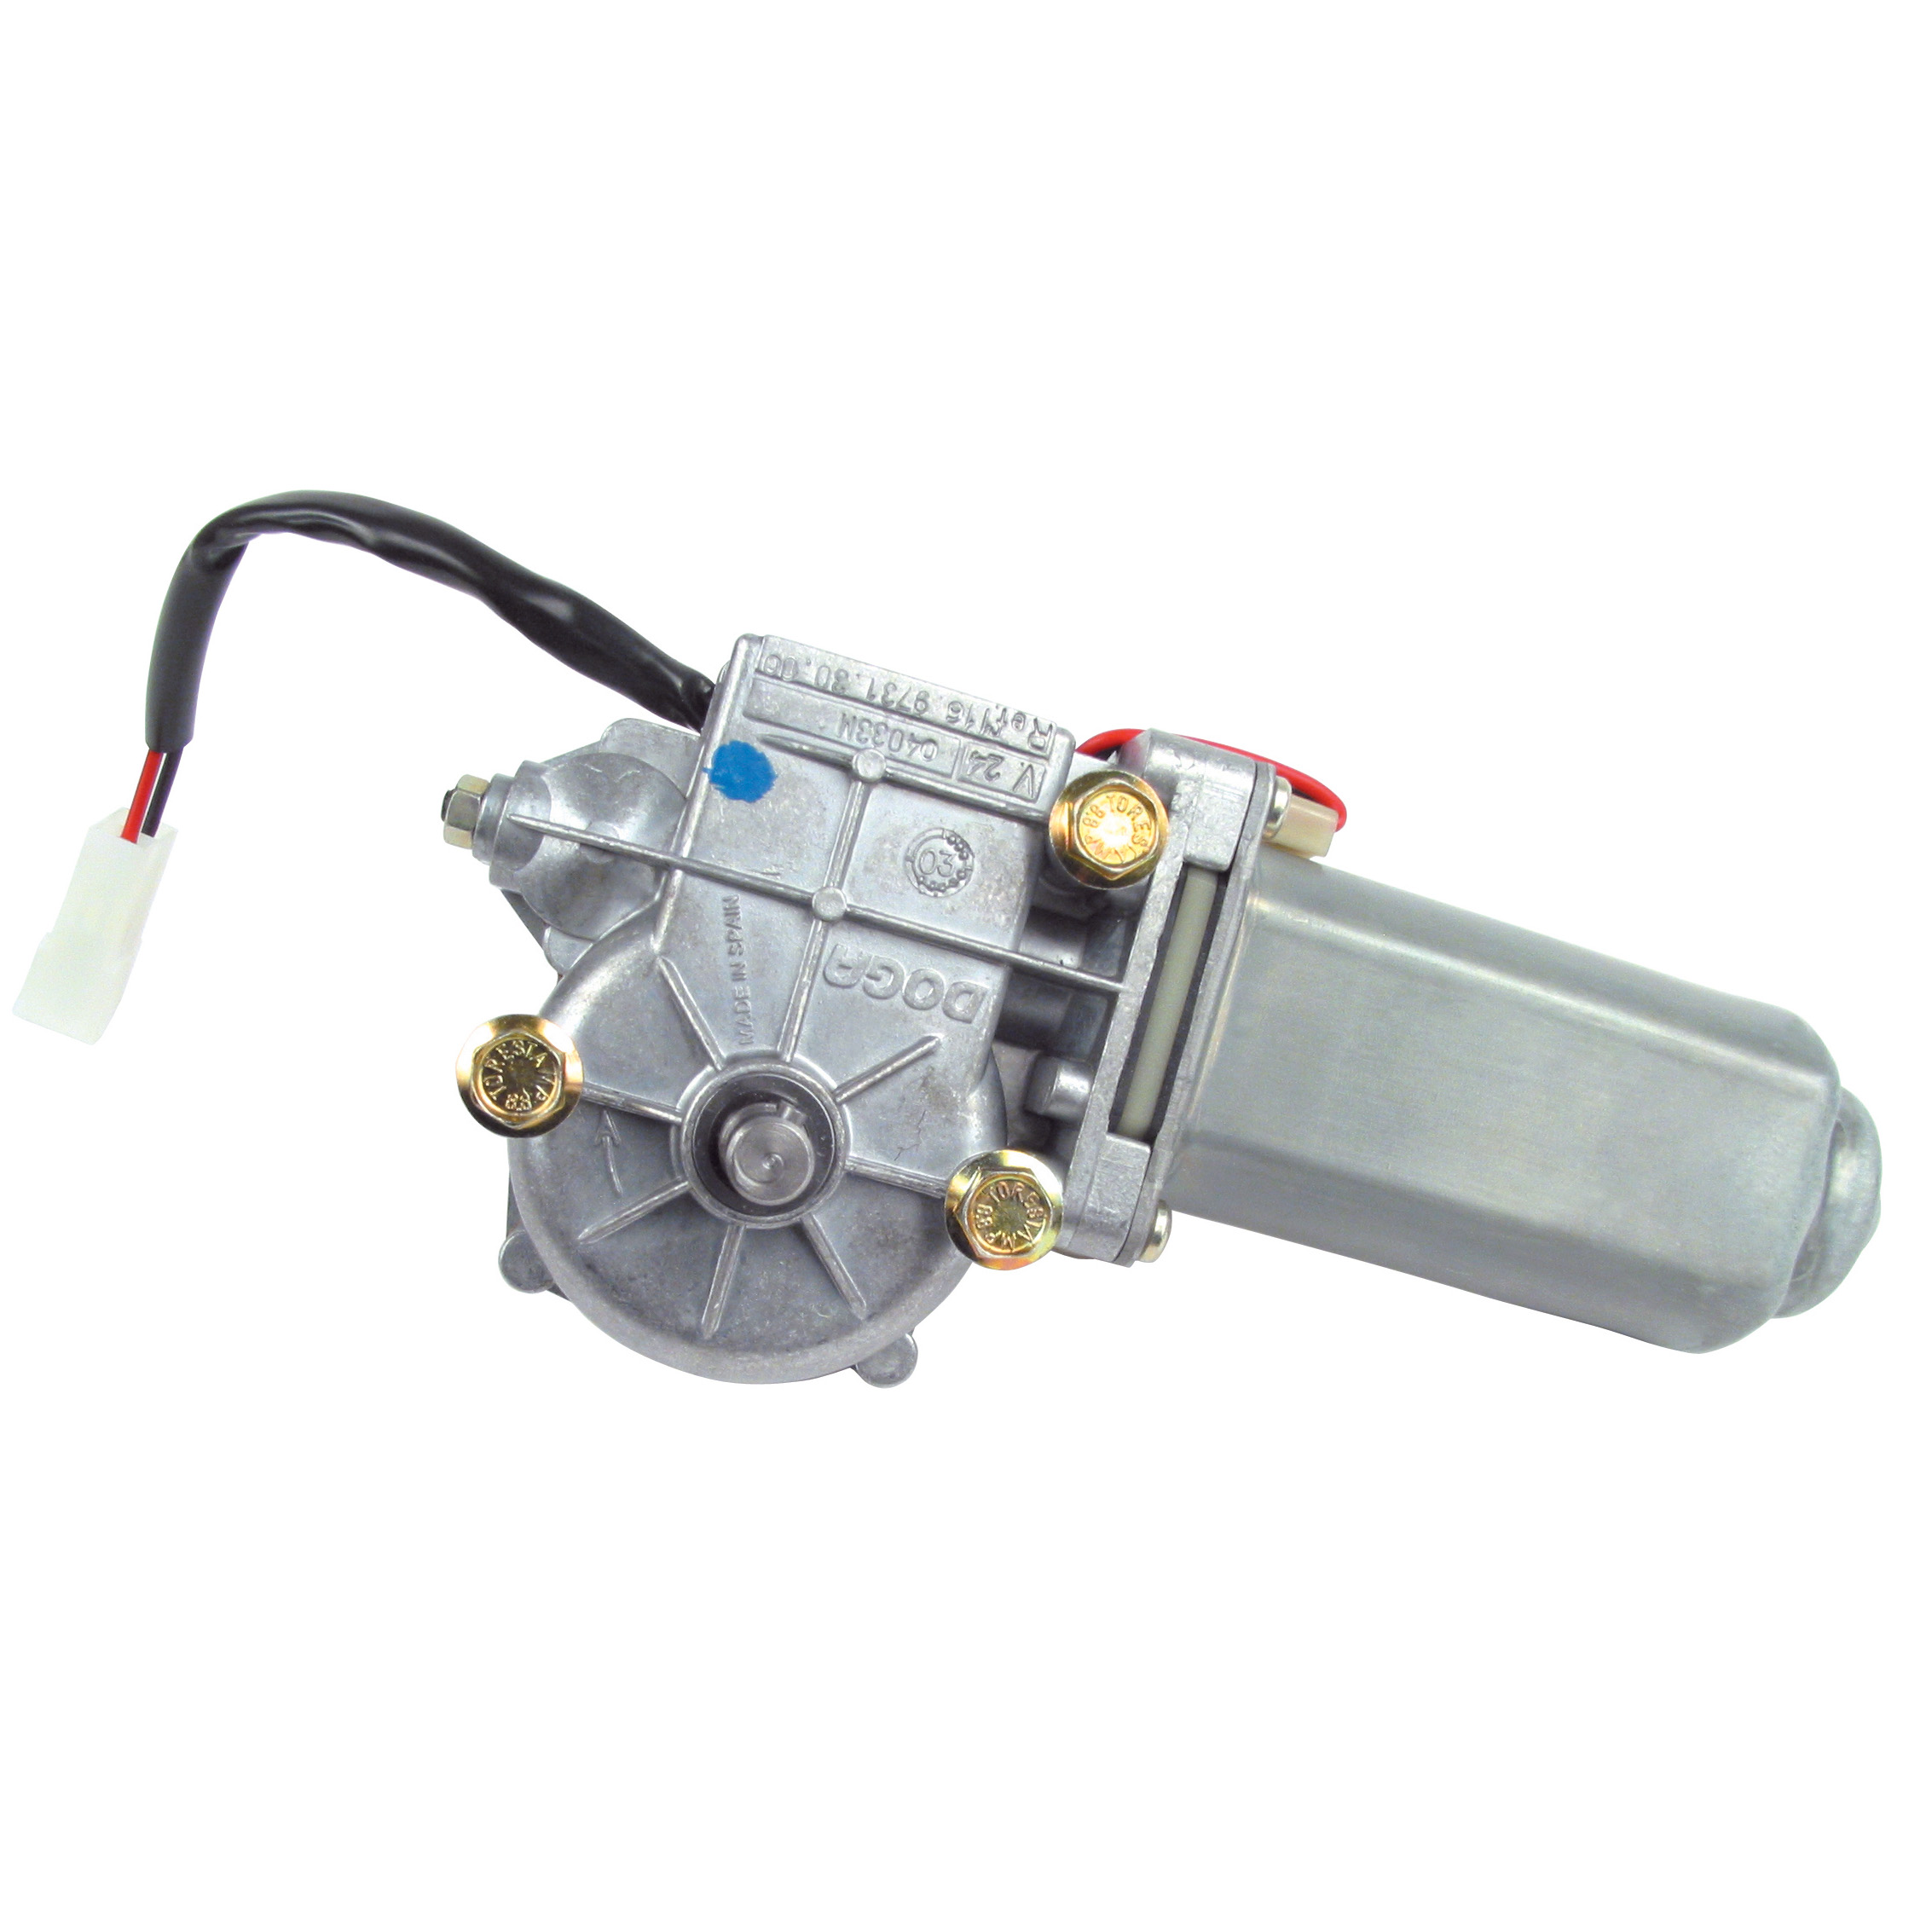 Motor-gearbox 12V and 24V DC - from 1.5 to 2 Nm - from 38 to 65 - 24 V DC